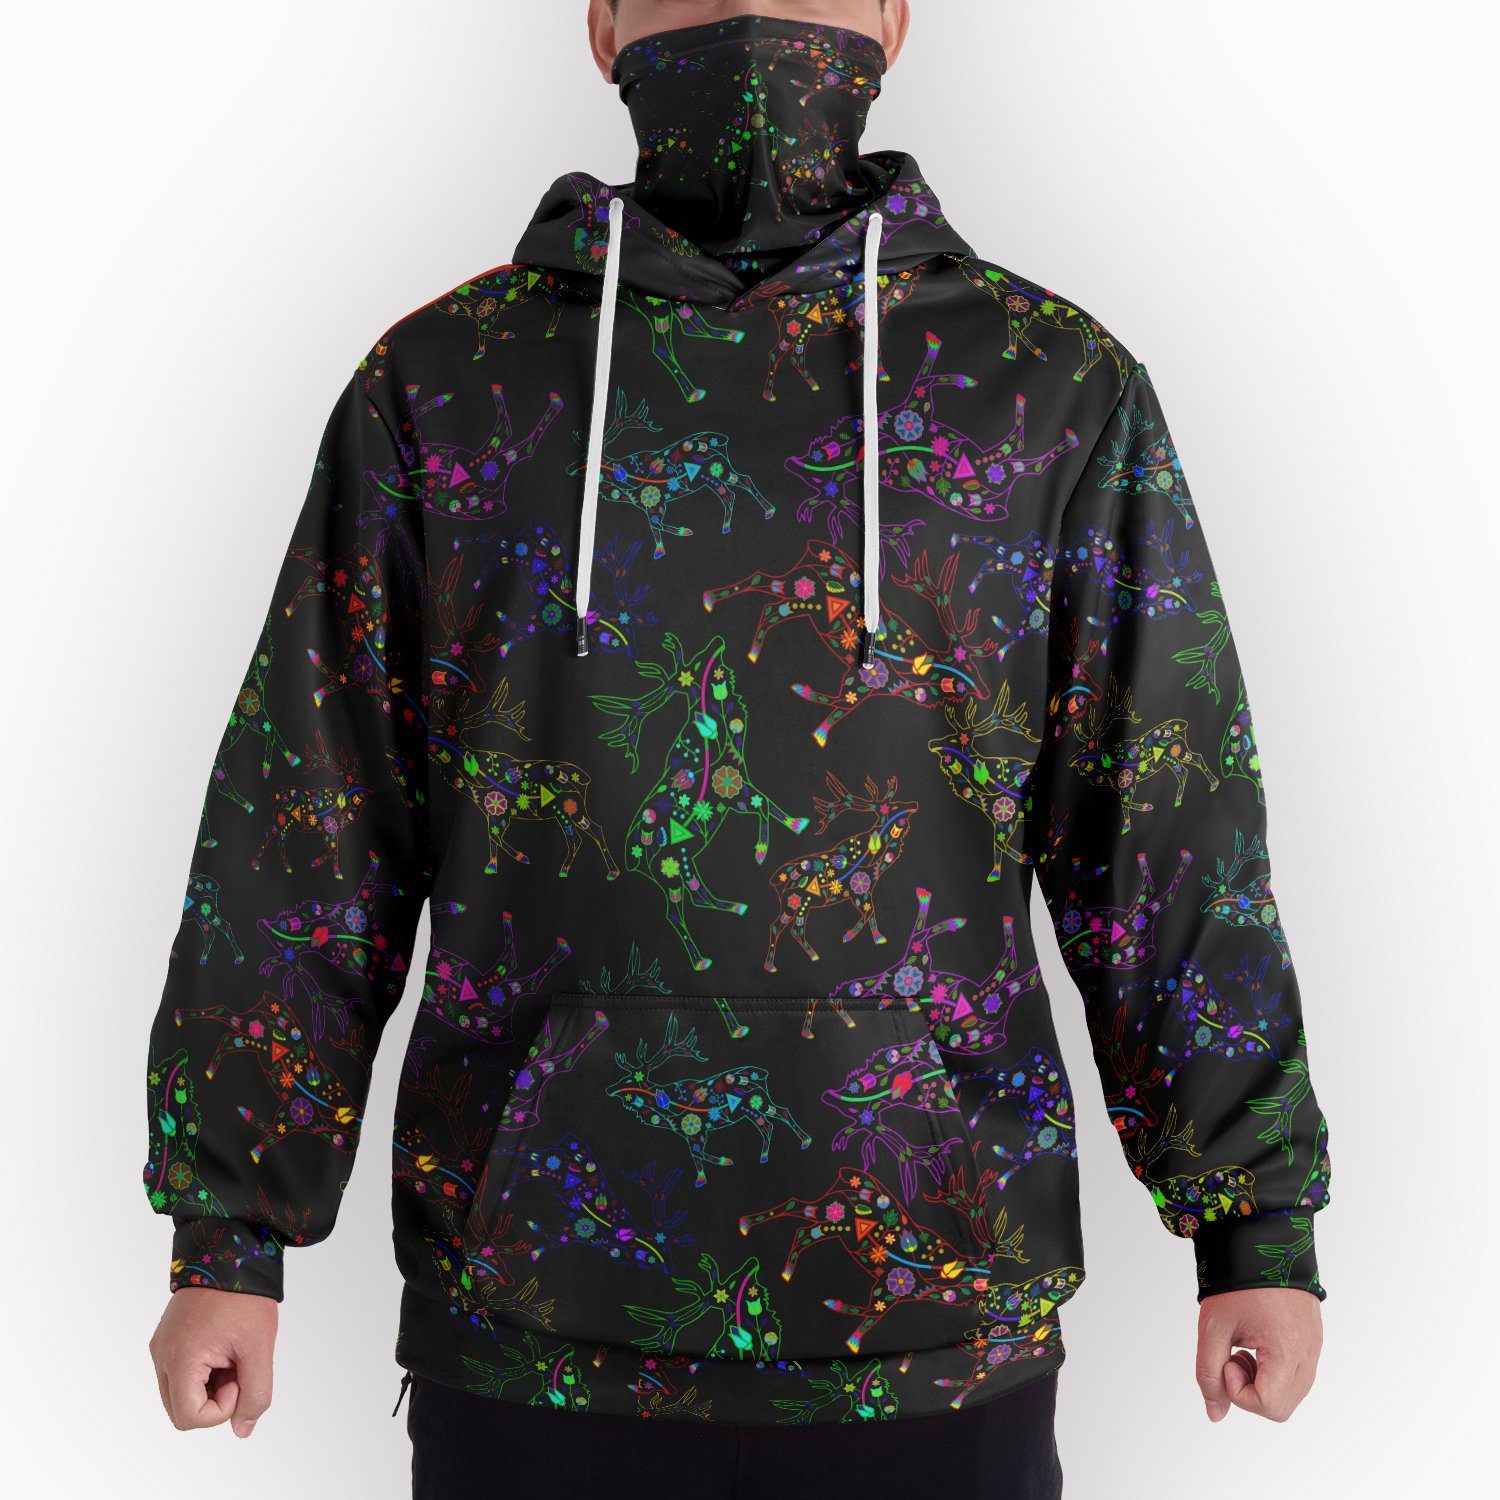 Neon Floral Elks Hoodie with Face Cover 49 Dzine 